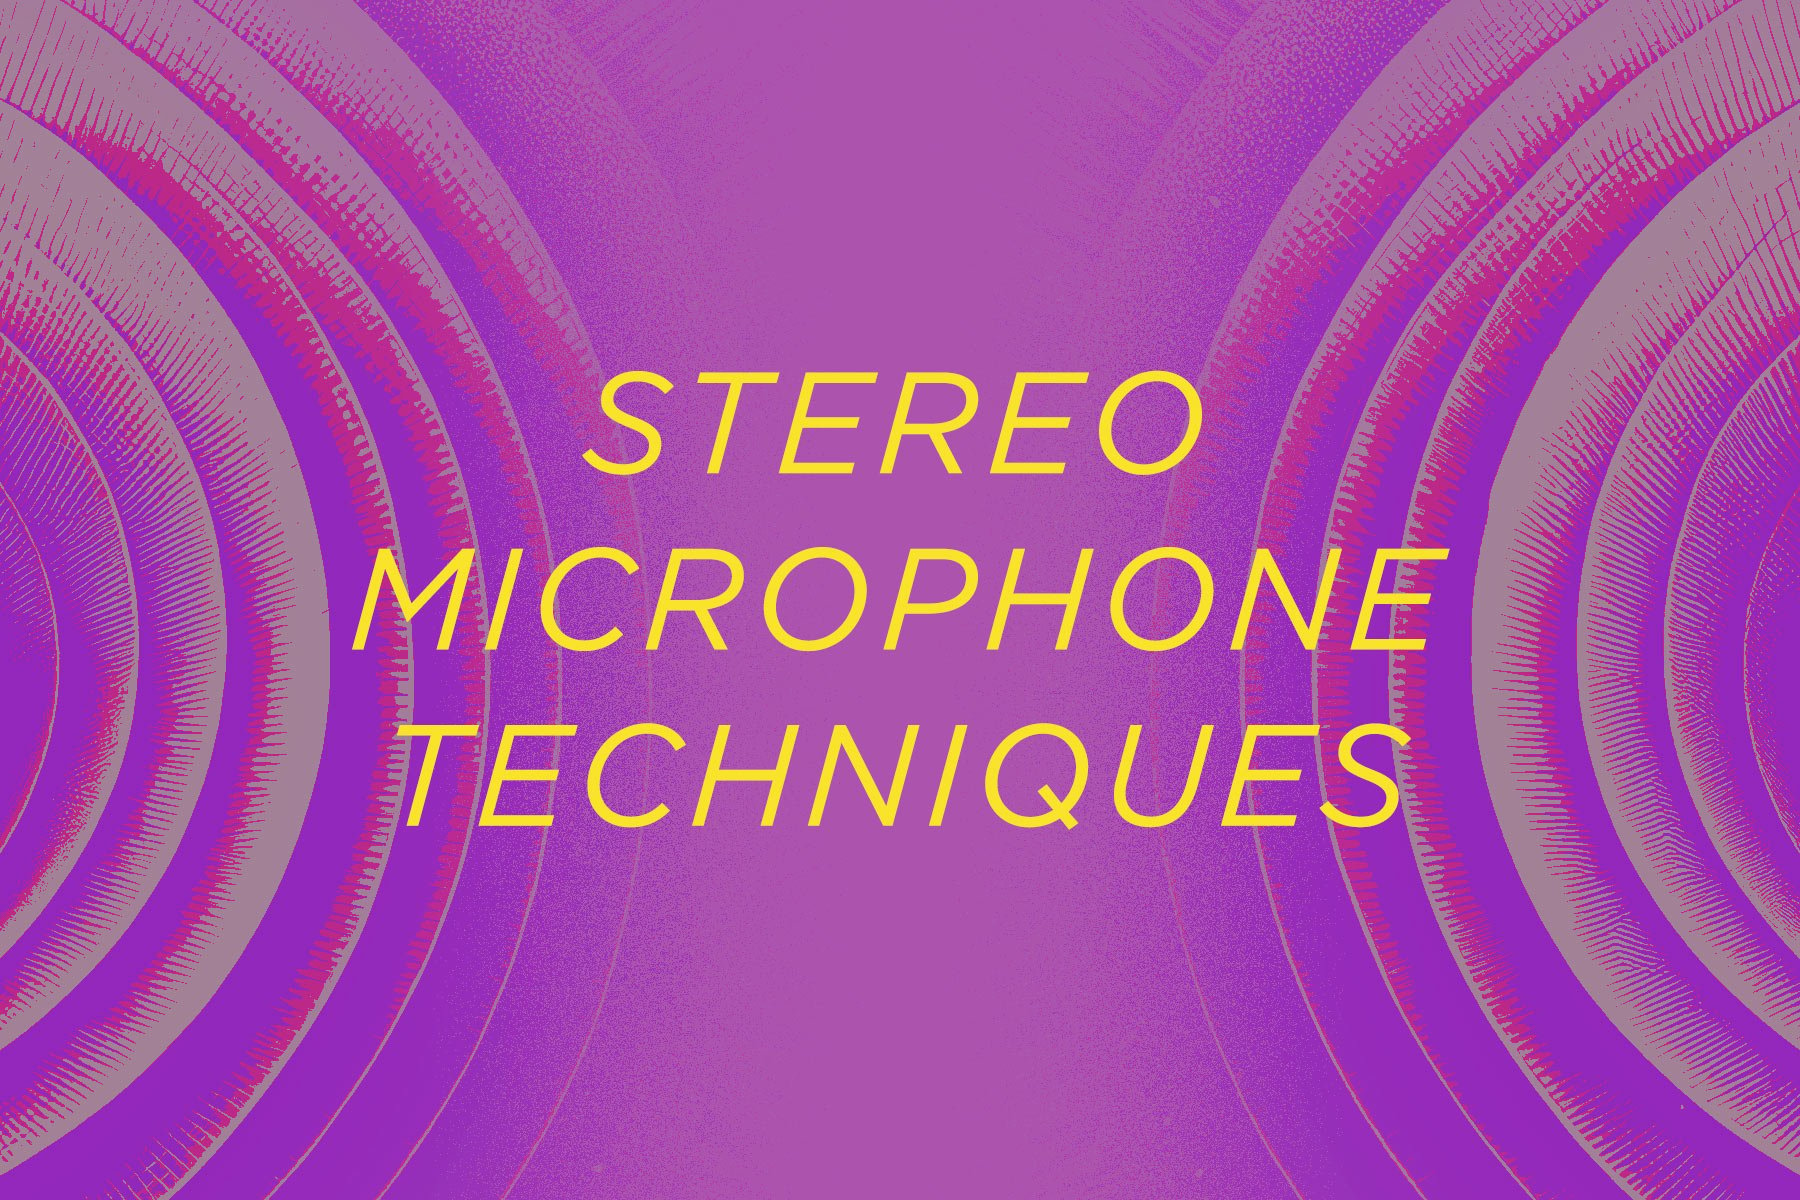 Stereo Microphone Techniques Explained